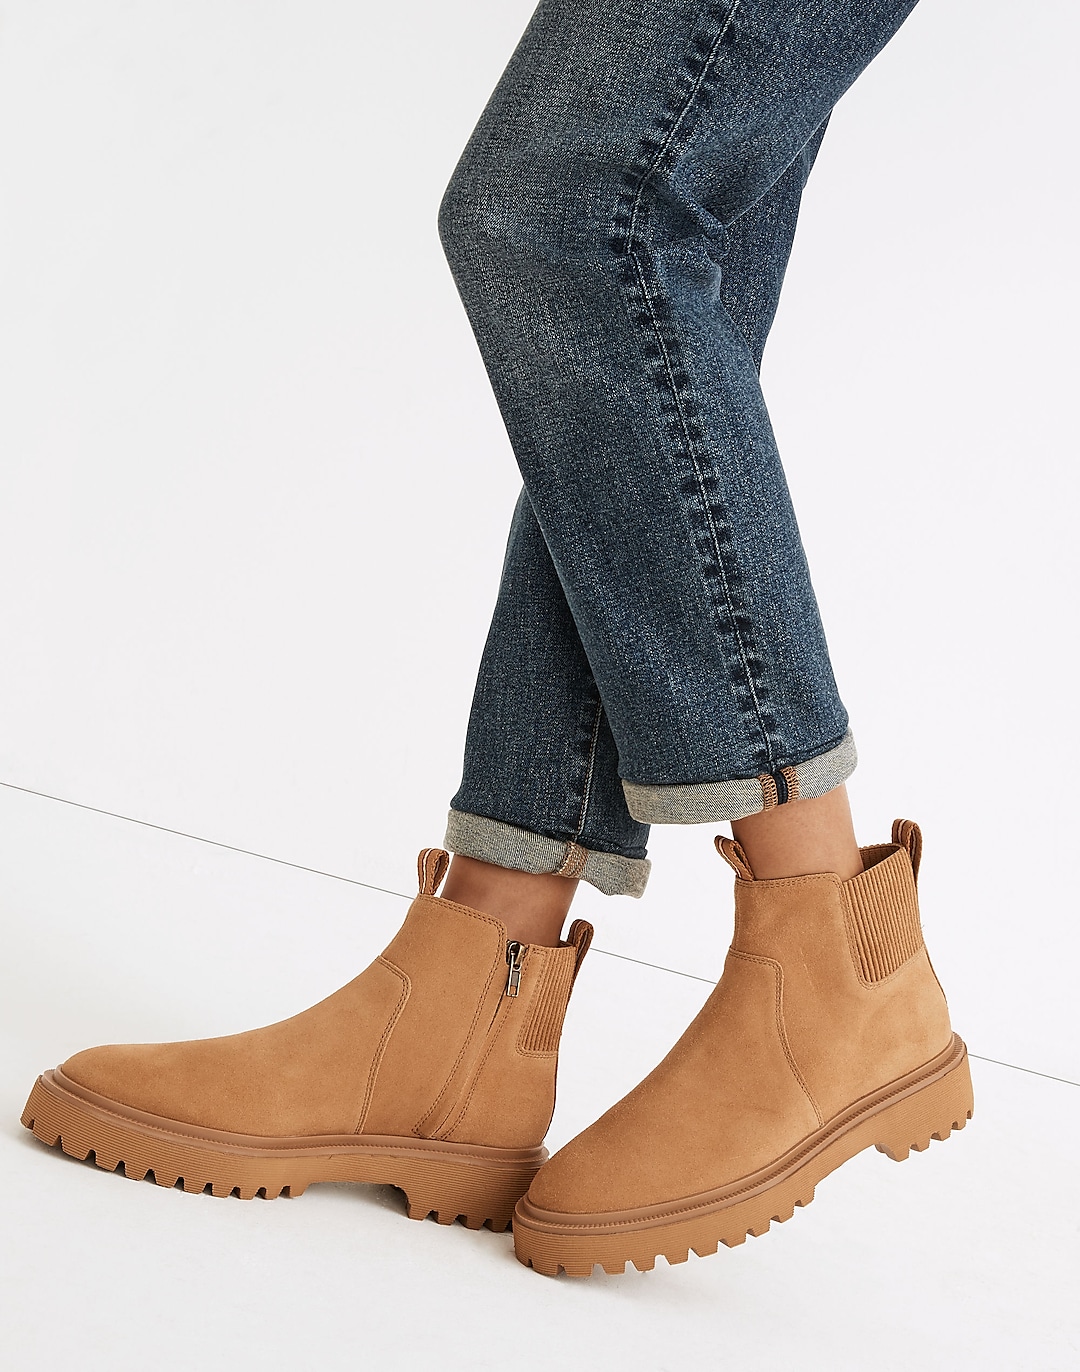 The Henry Lugsole Boot in Suede